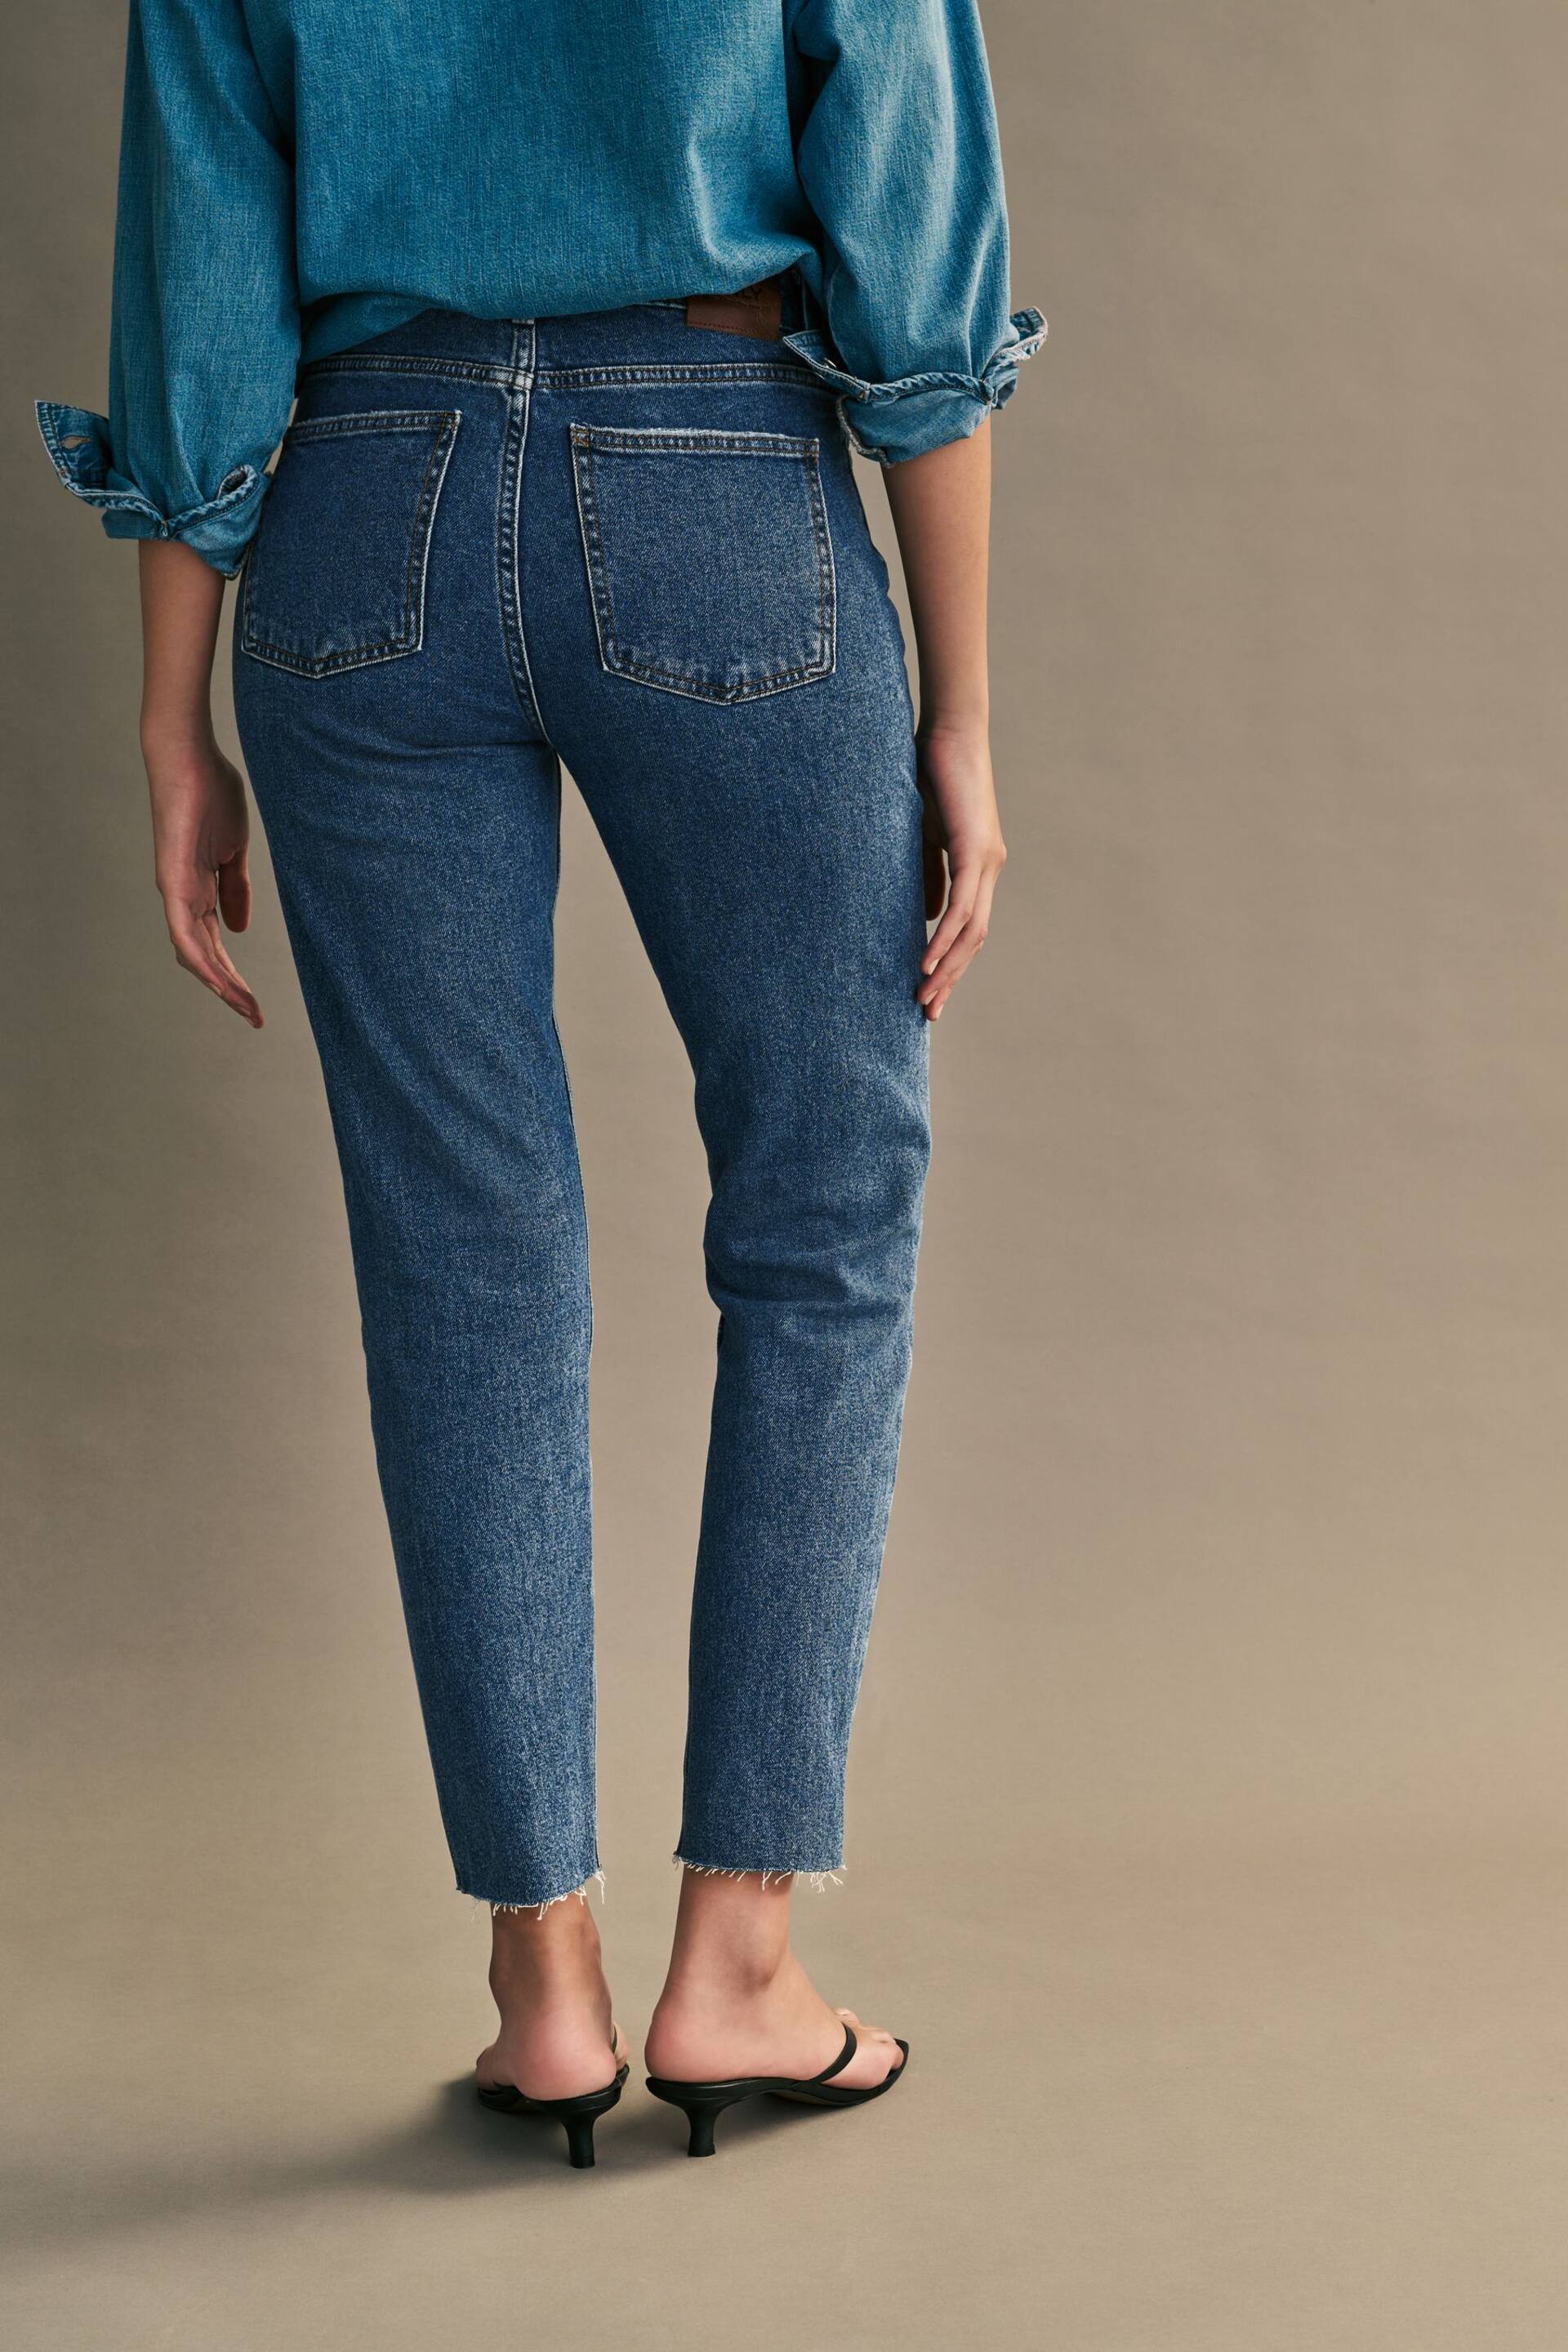 ONLY Blue High Waisted Straight Leg Emily Jeans - Image 3 of 6